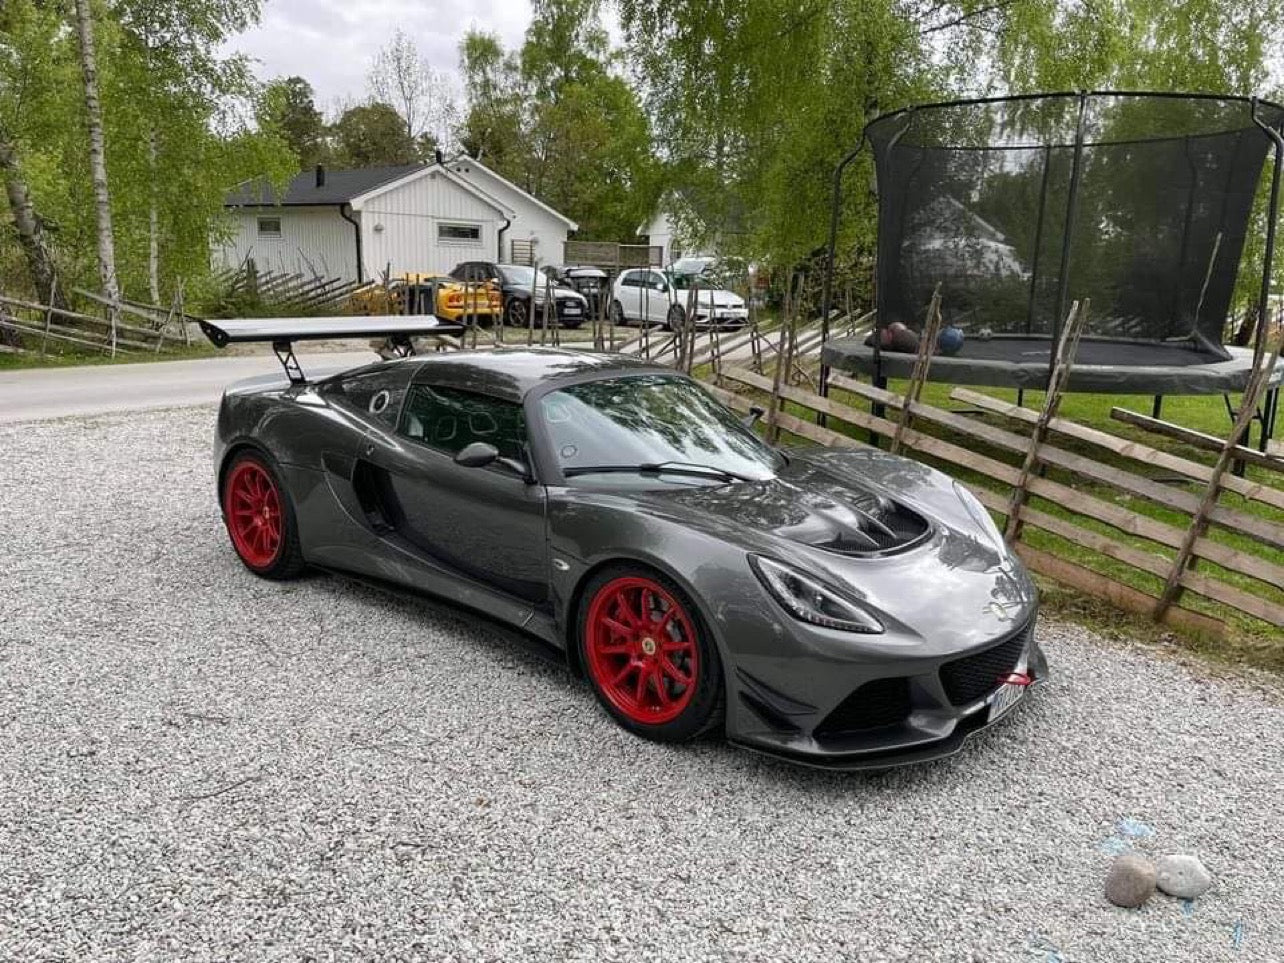 Lotus Exige V6 Forged Wheels Candy Red